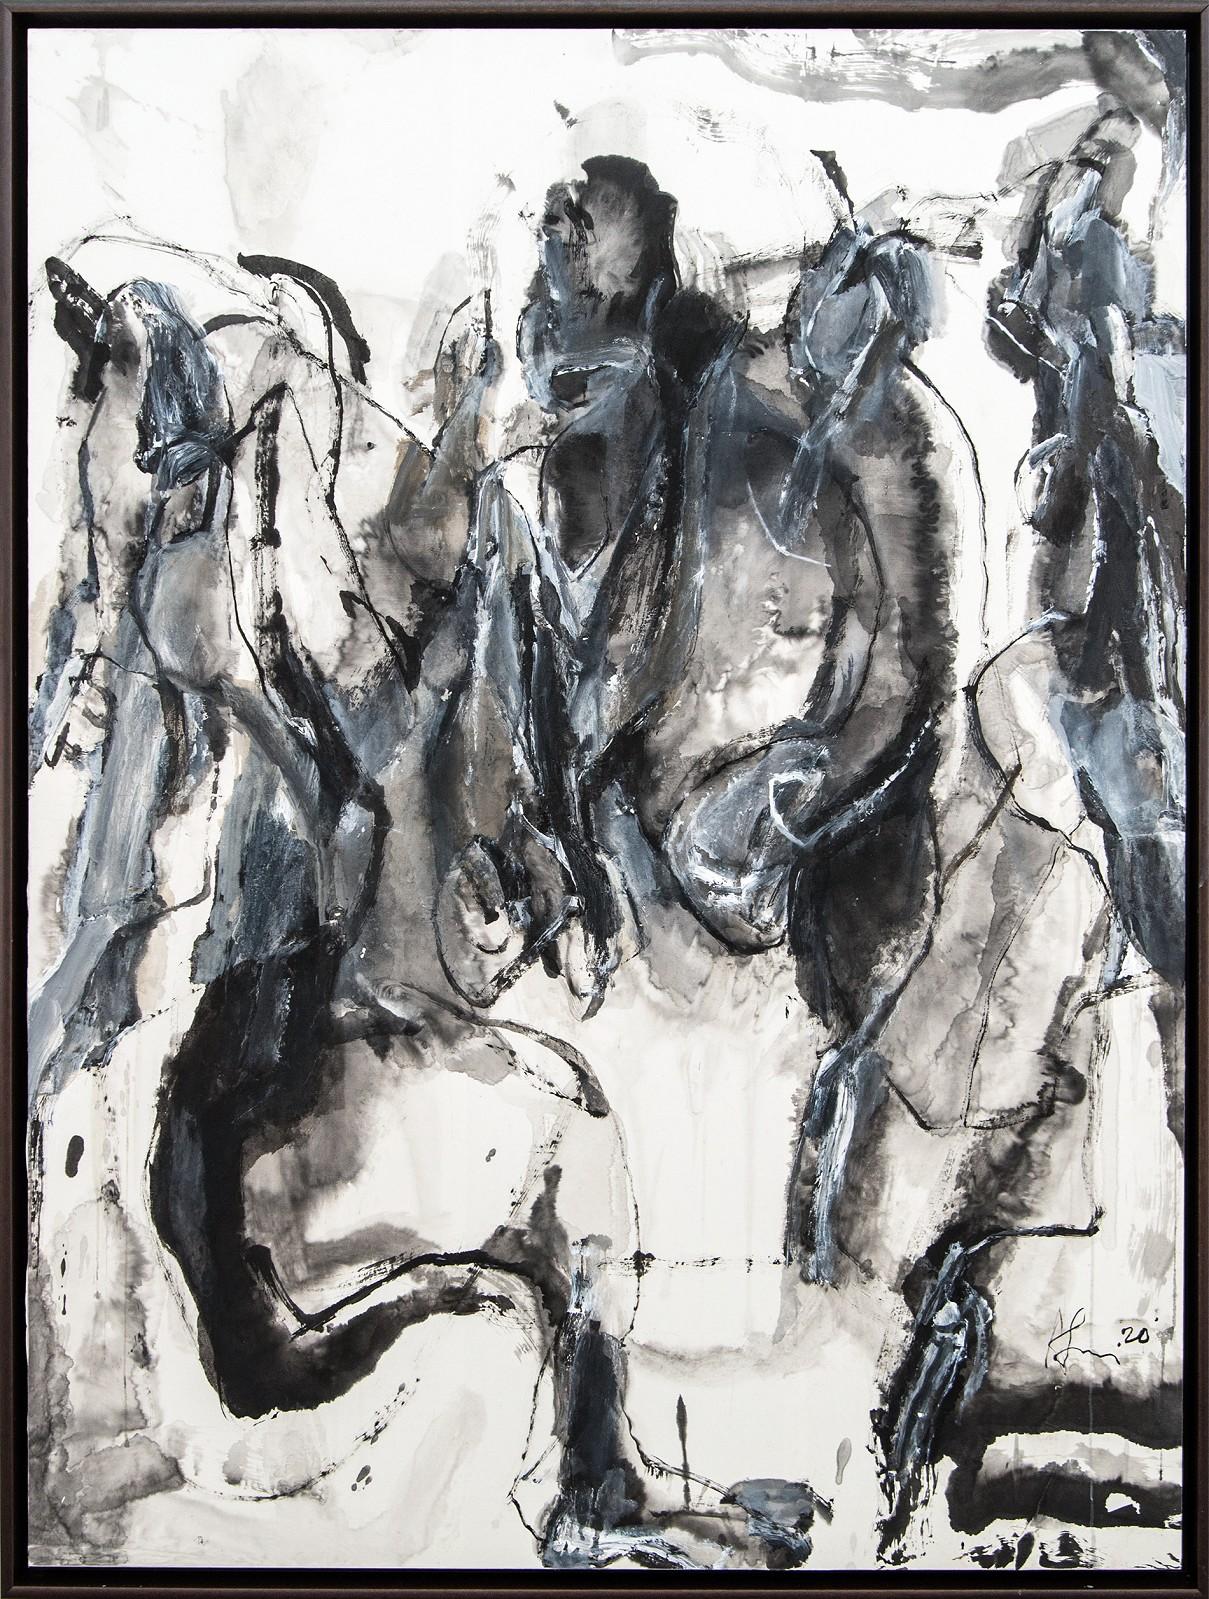 Abstract Painting Andrew Lui - Whiting Timelessness as it is to Time II - noir et blanc, abstrait, acrylique, encre